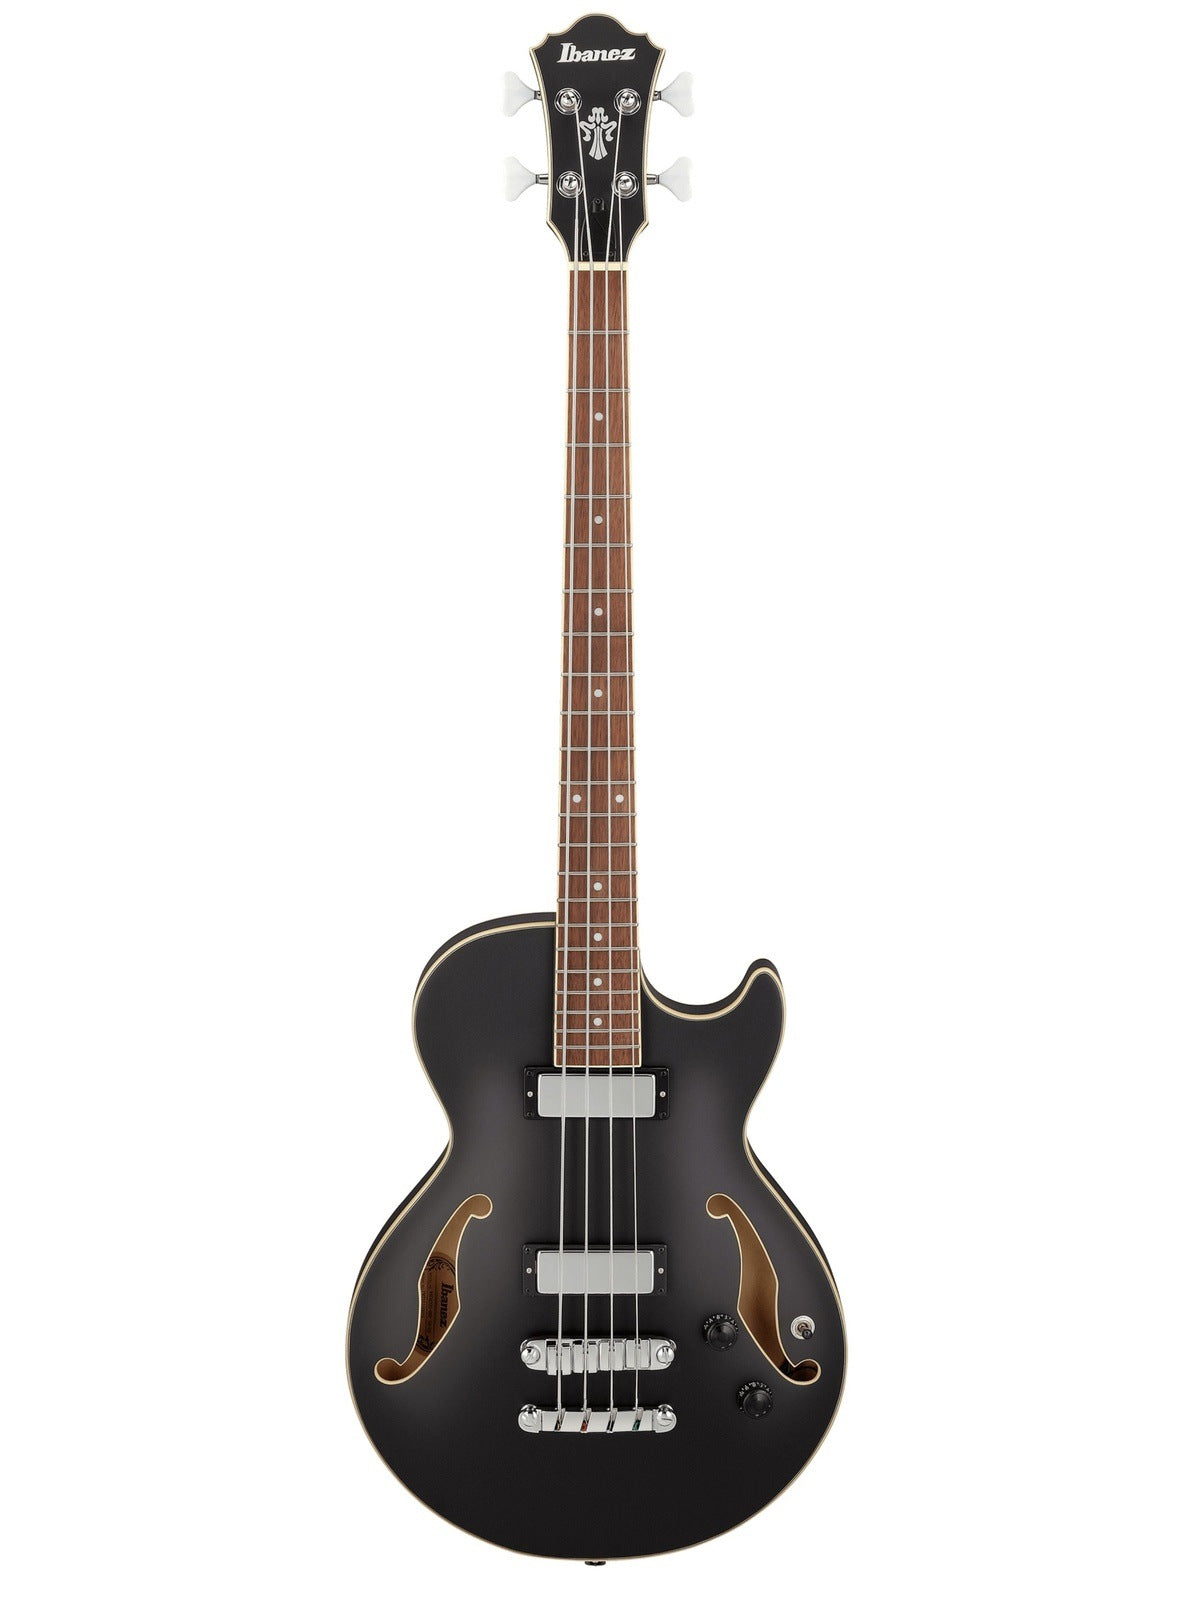 Ibanez AGB200 Electric Bass